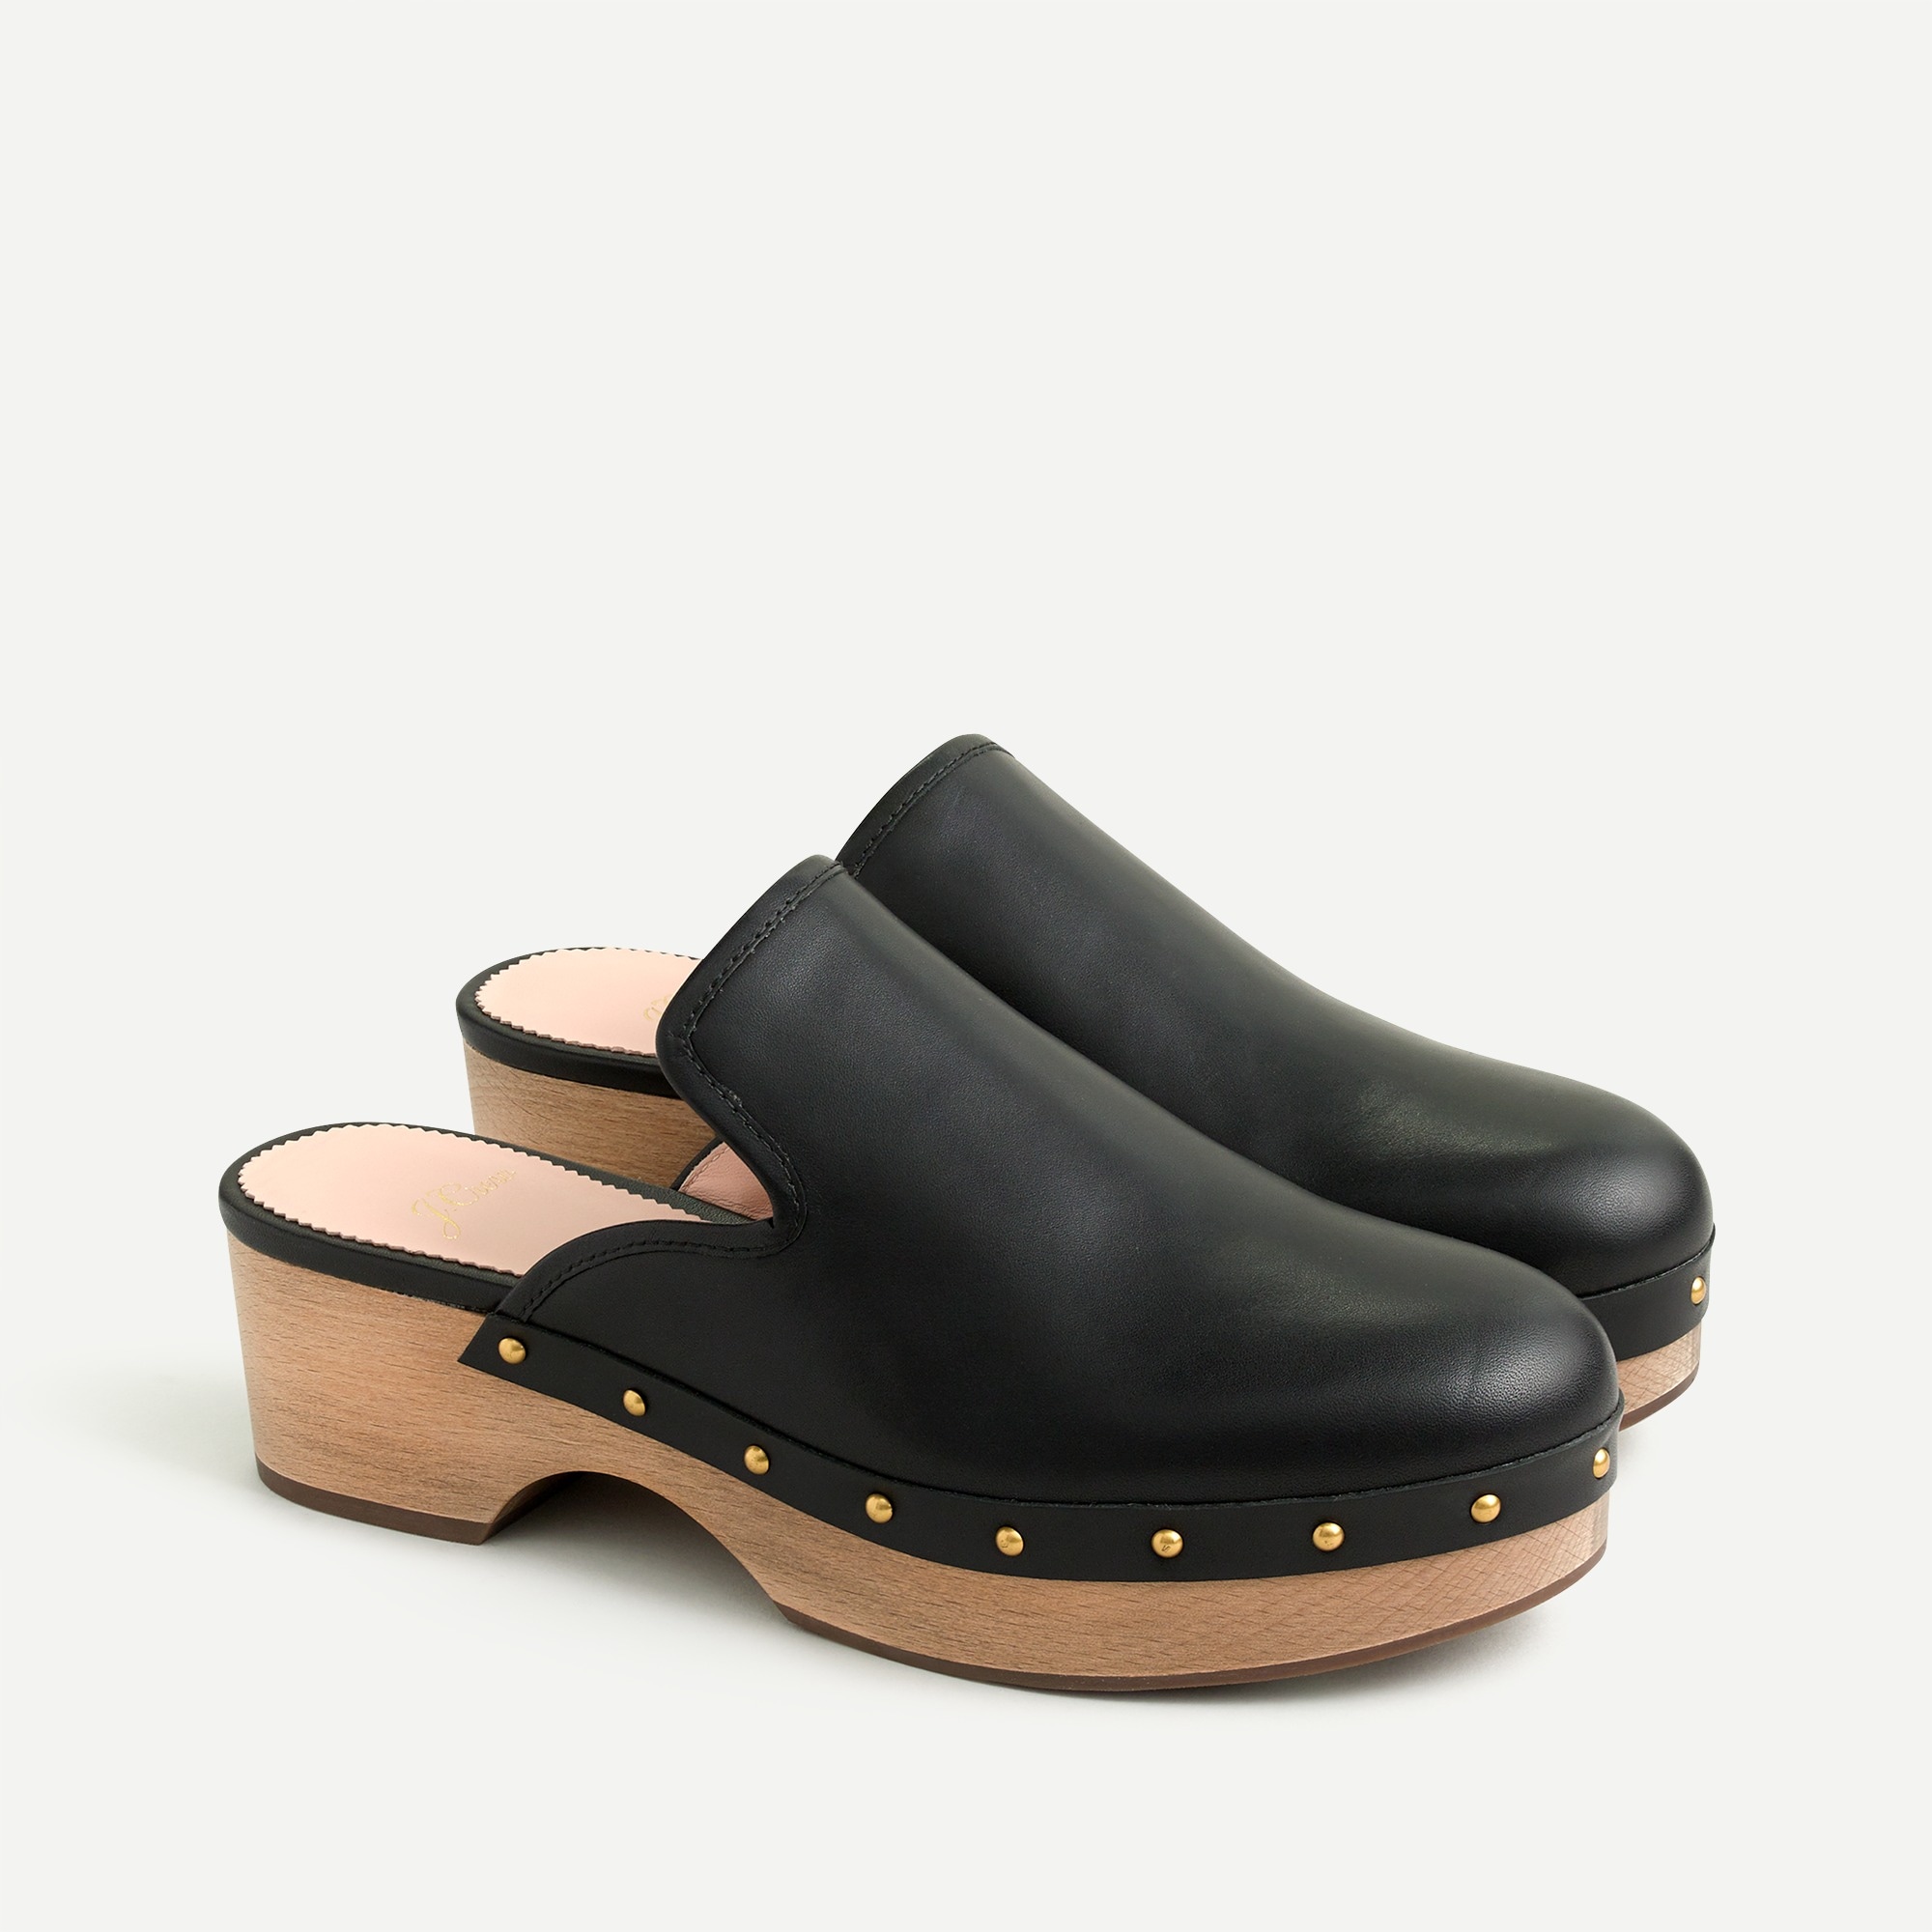 J.Crew: Leather Clogs For Women